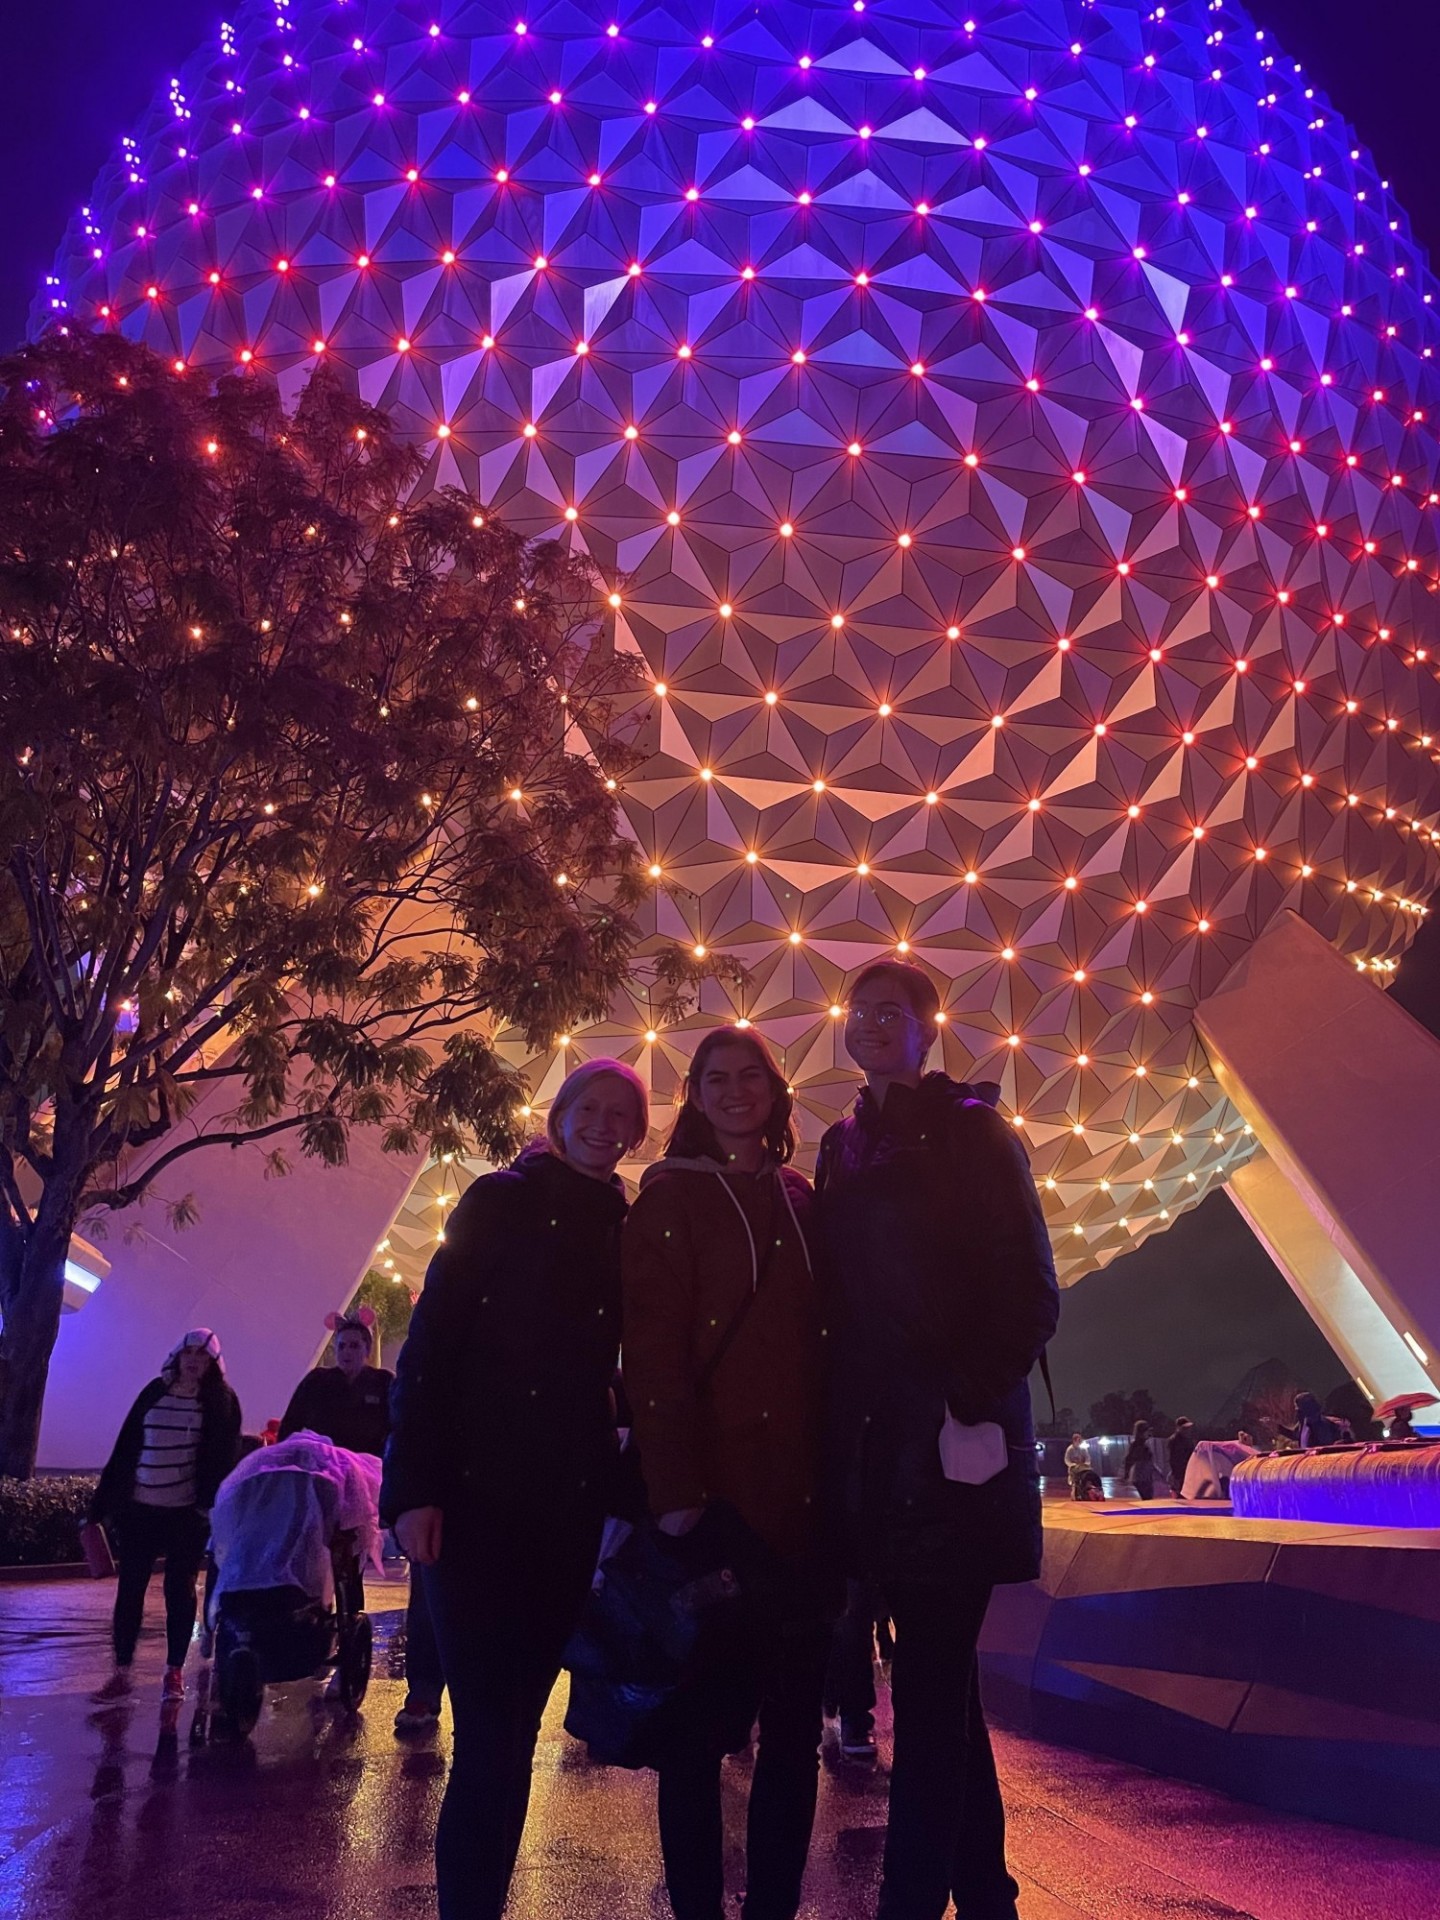 Quick stop at Epcot before heading home